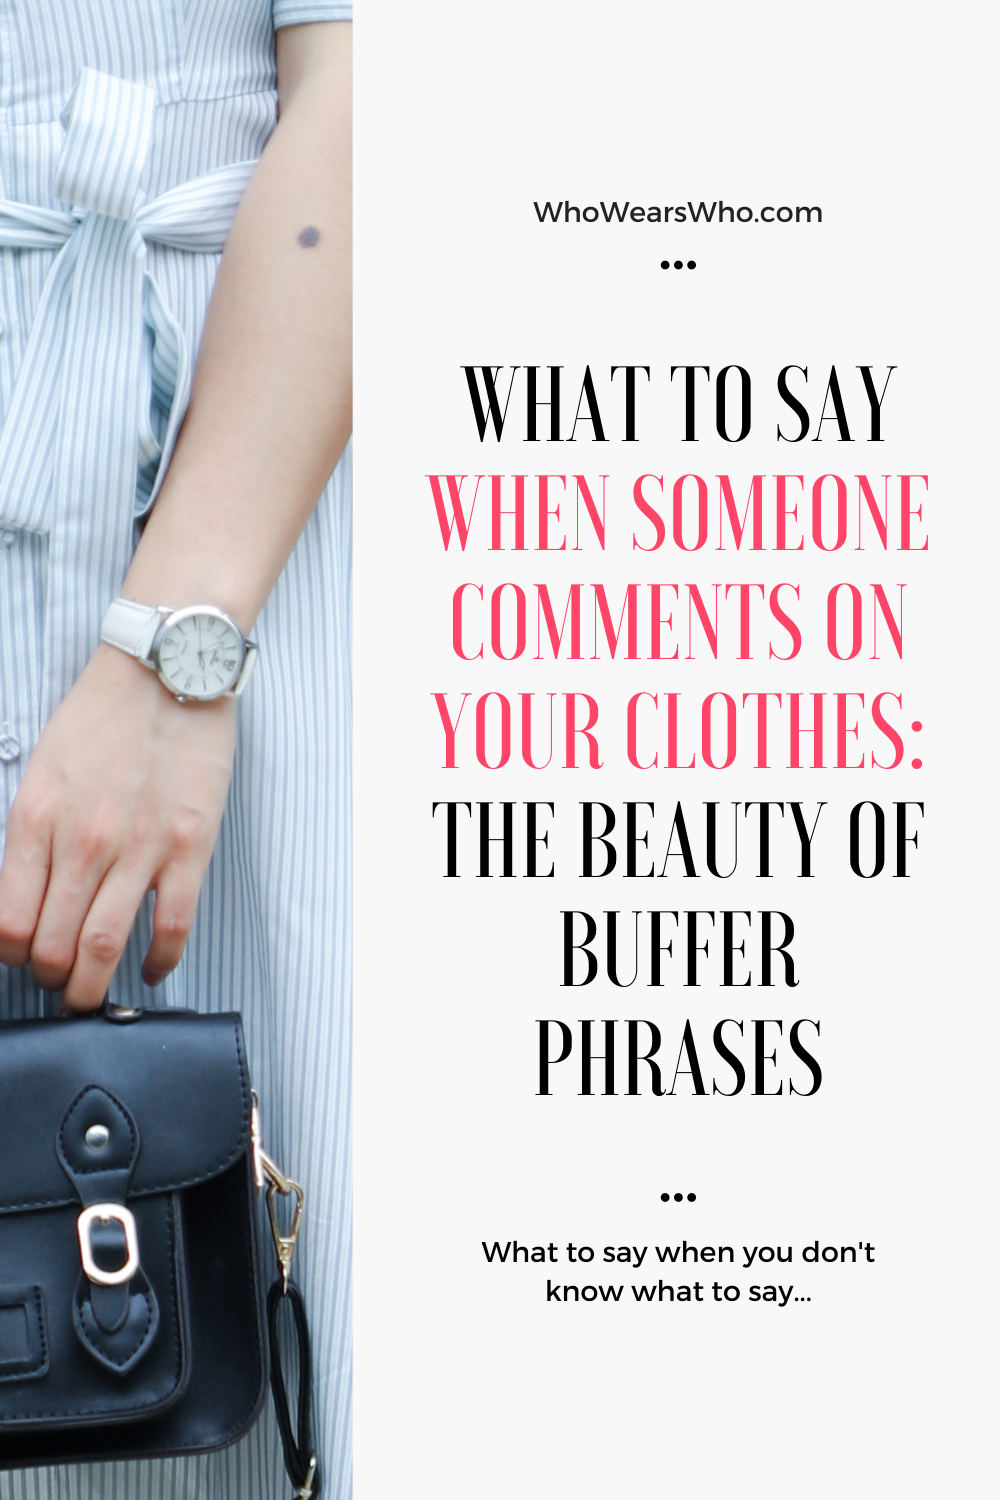 What to say when someone comments on your clothes